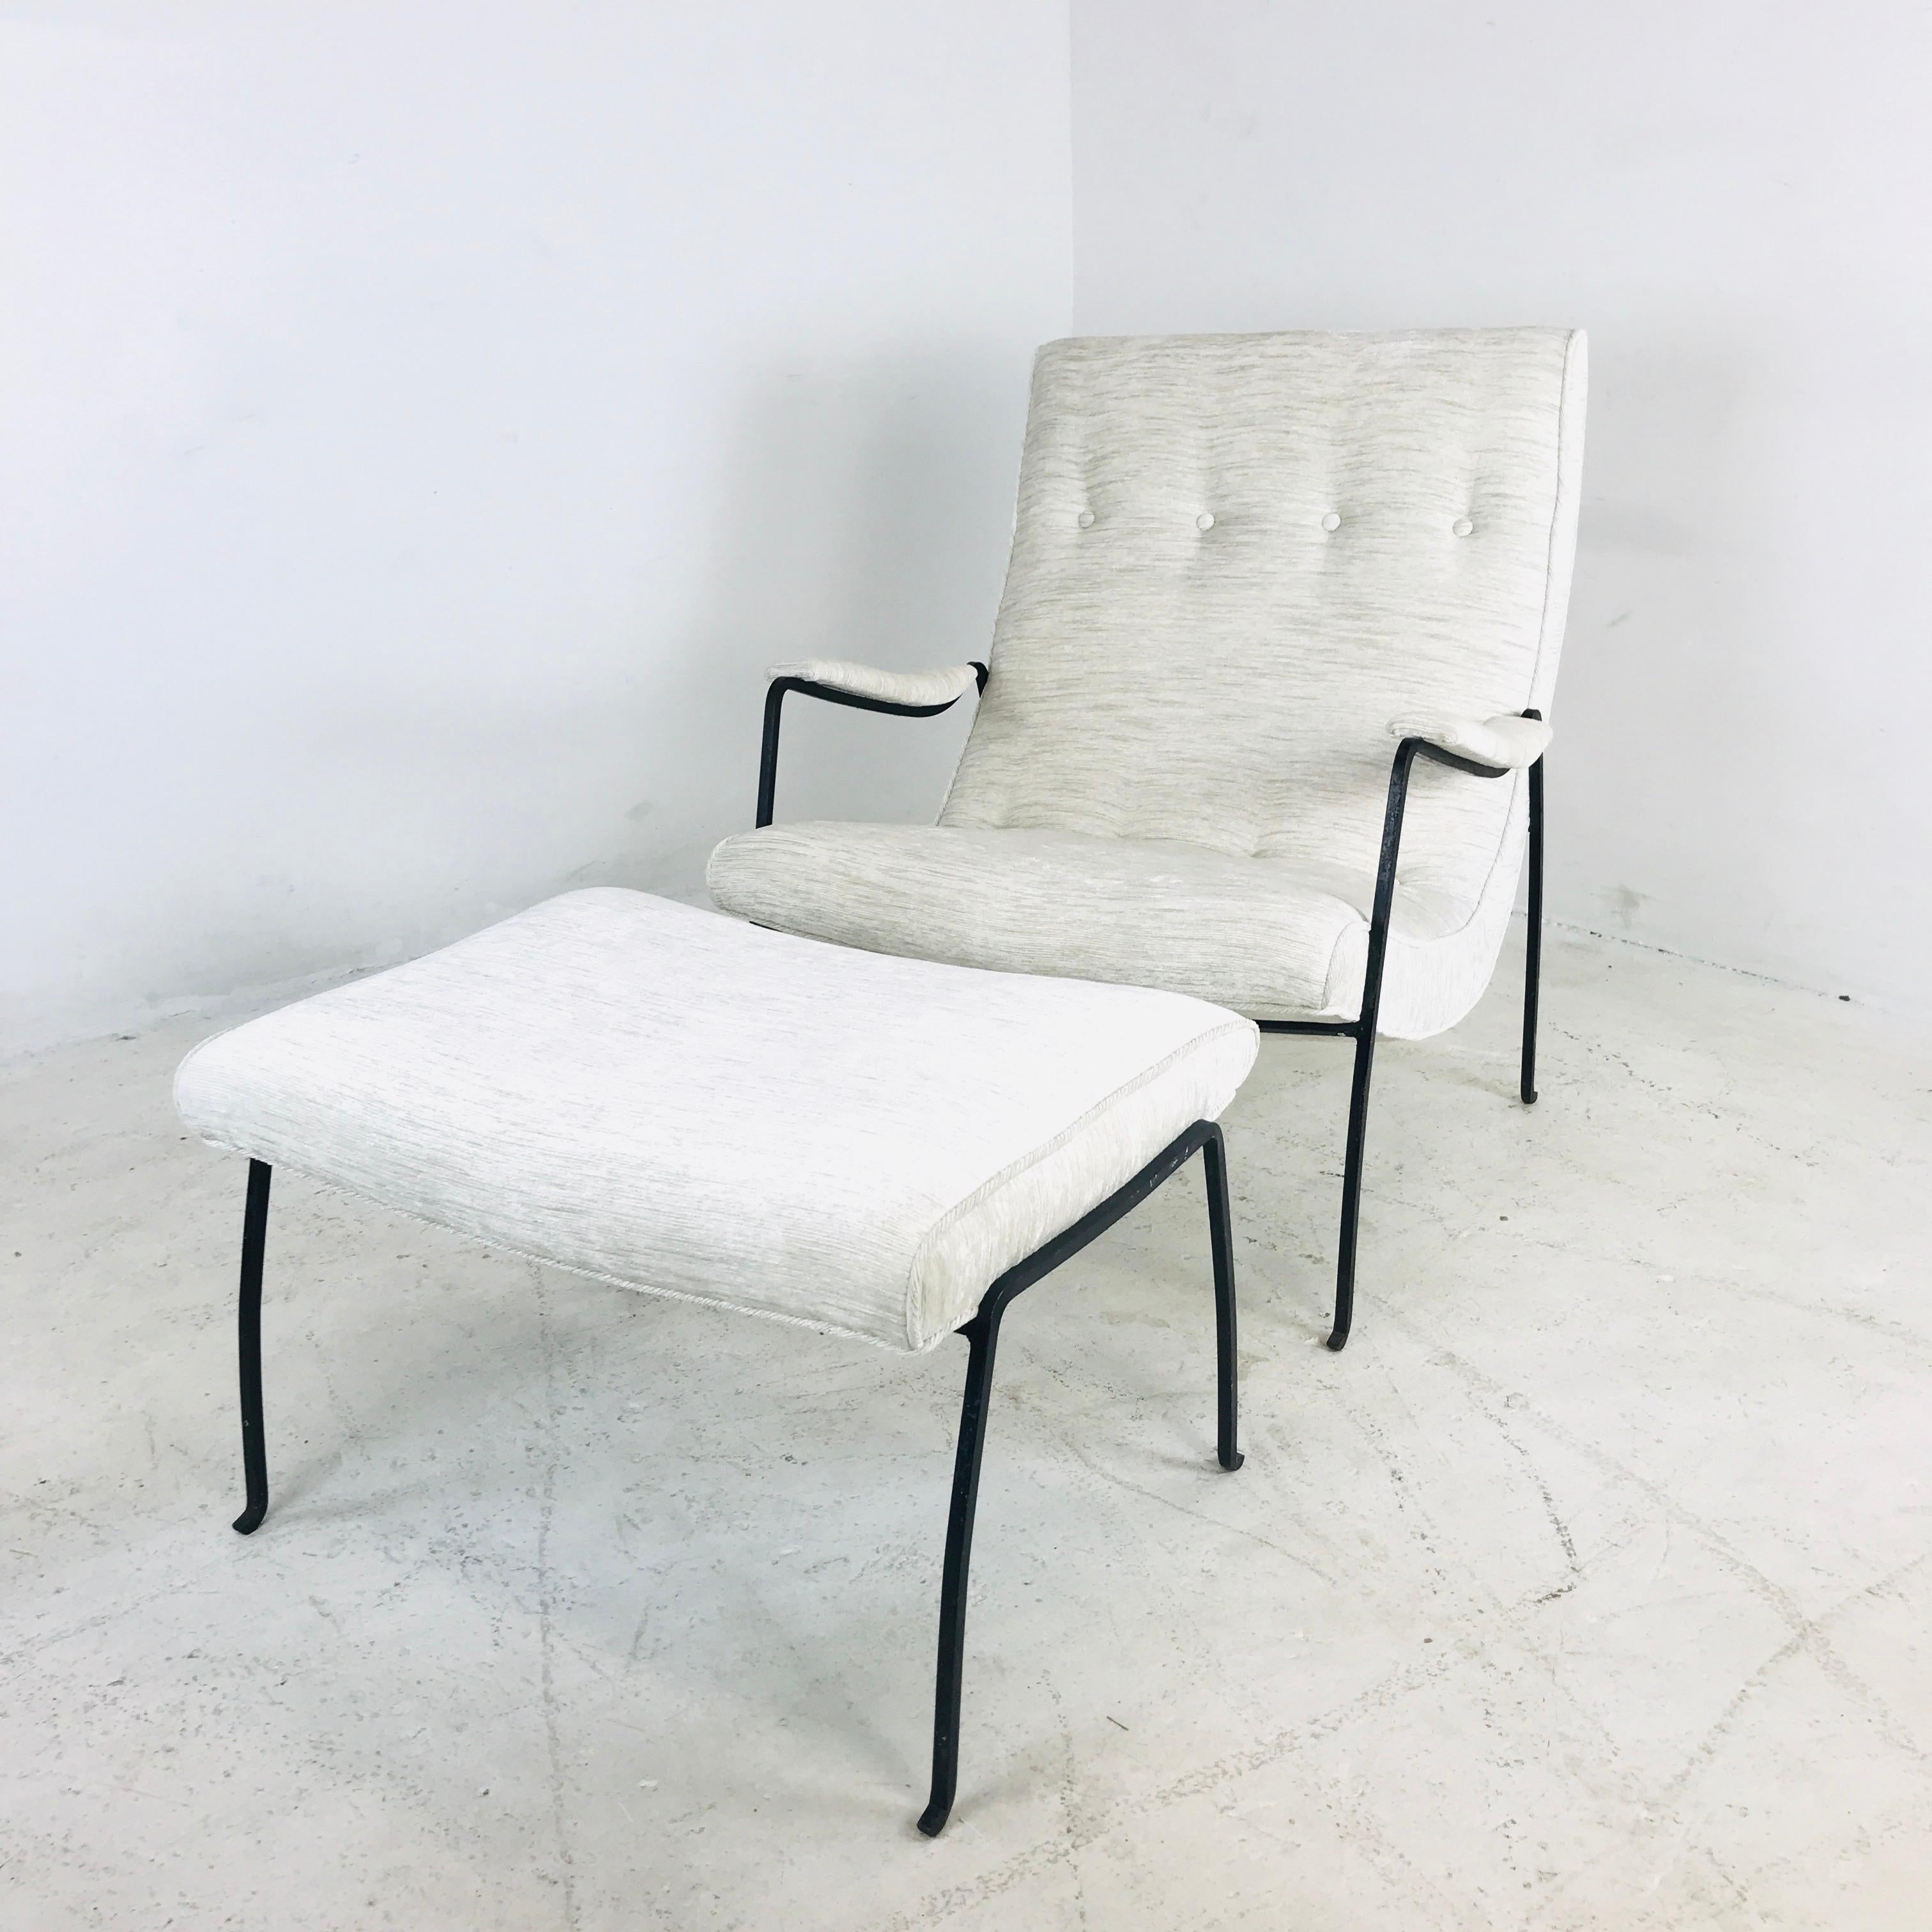 Rare wrought iron framed lounge chair and ottoman designed by Milo Baughman for Pacifica iron works from the 1950s. Newly reupholstered.